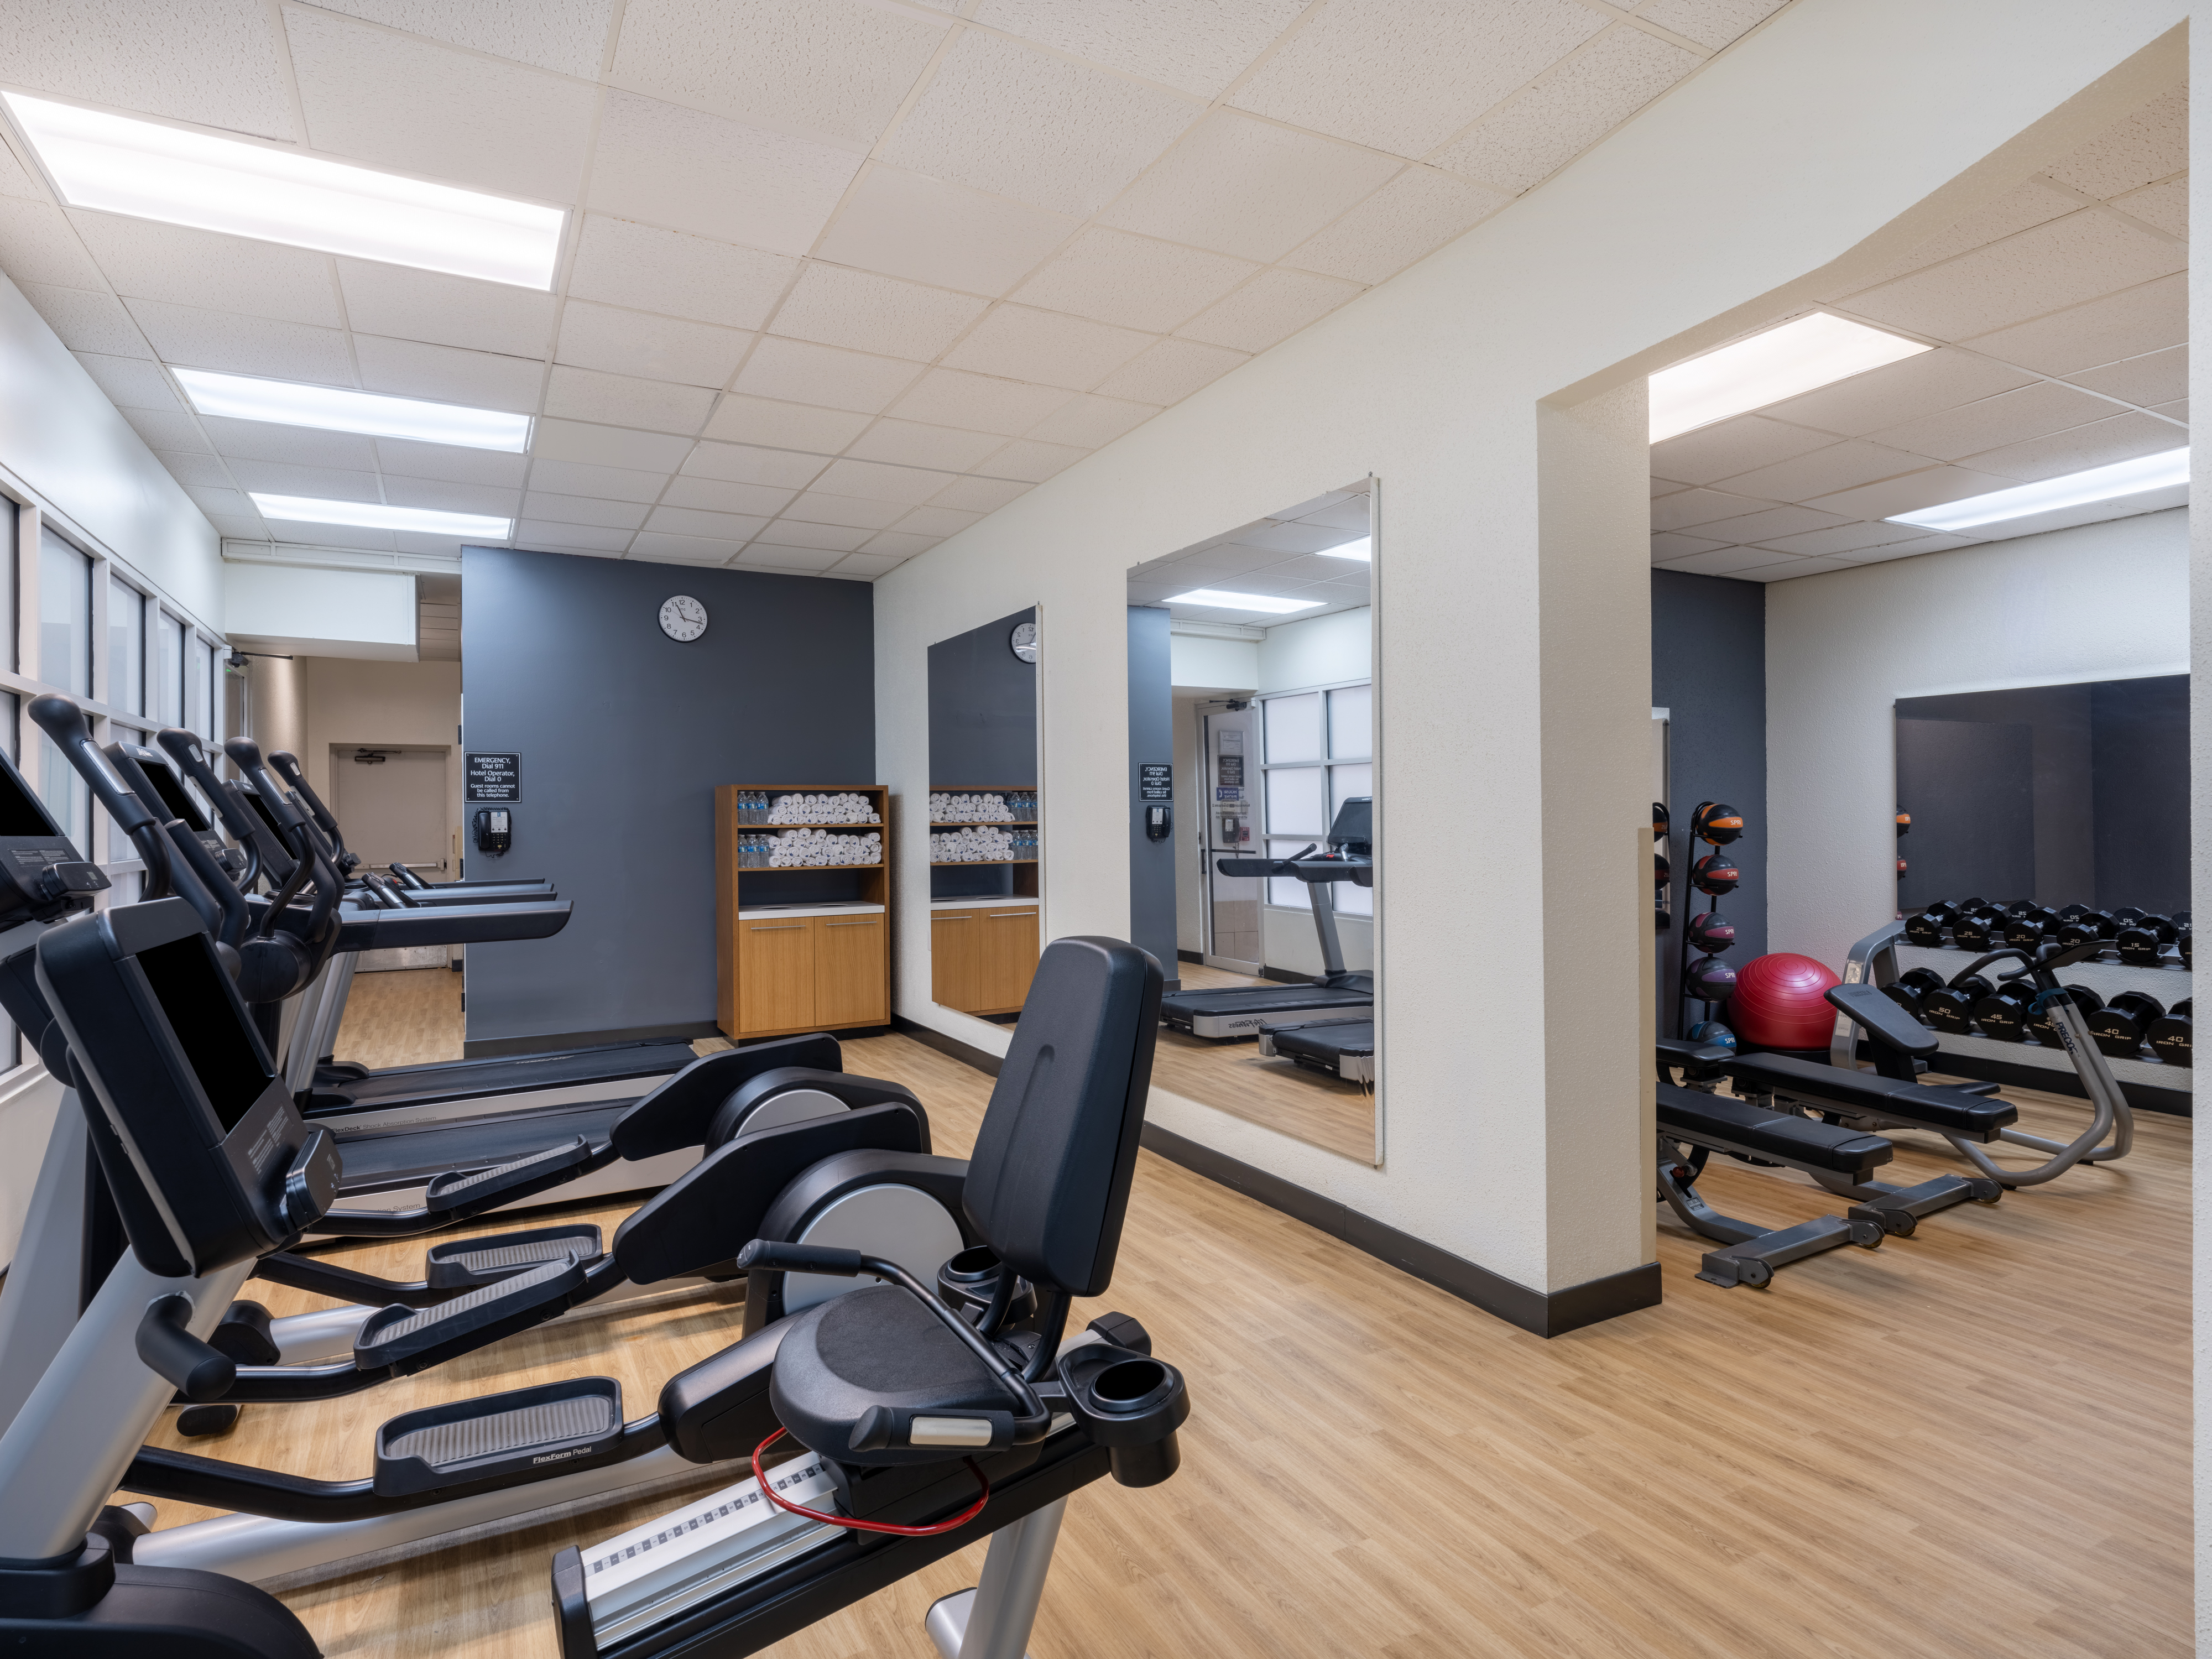 Get in a quick sweat session at our fitness center